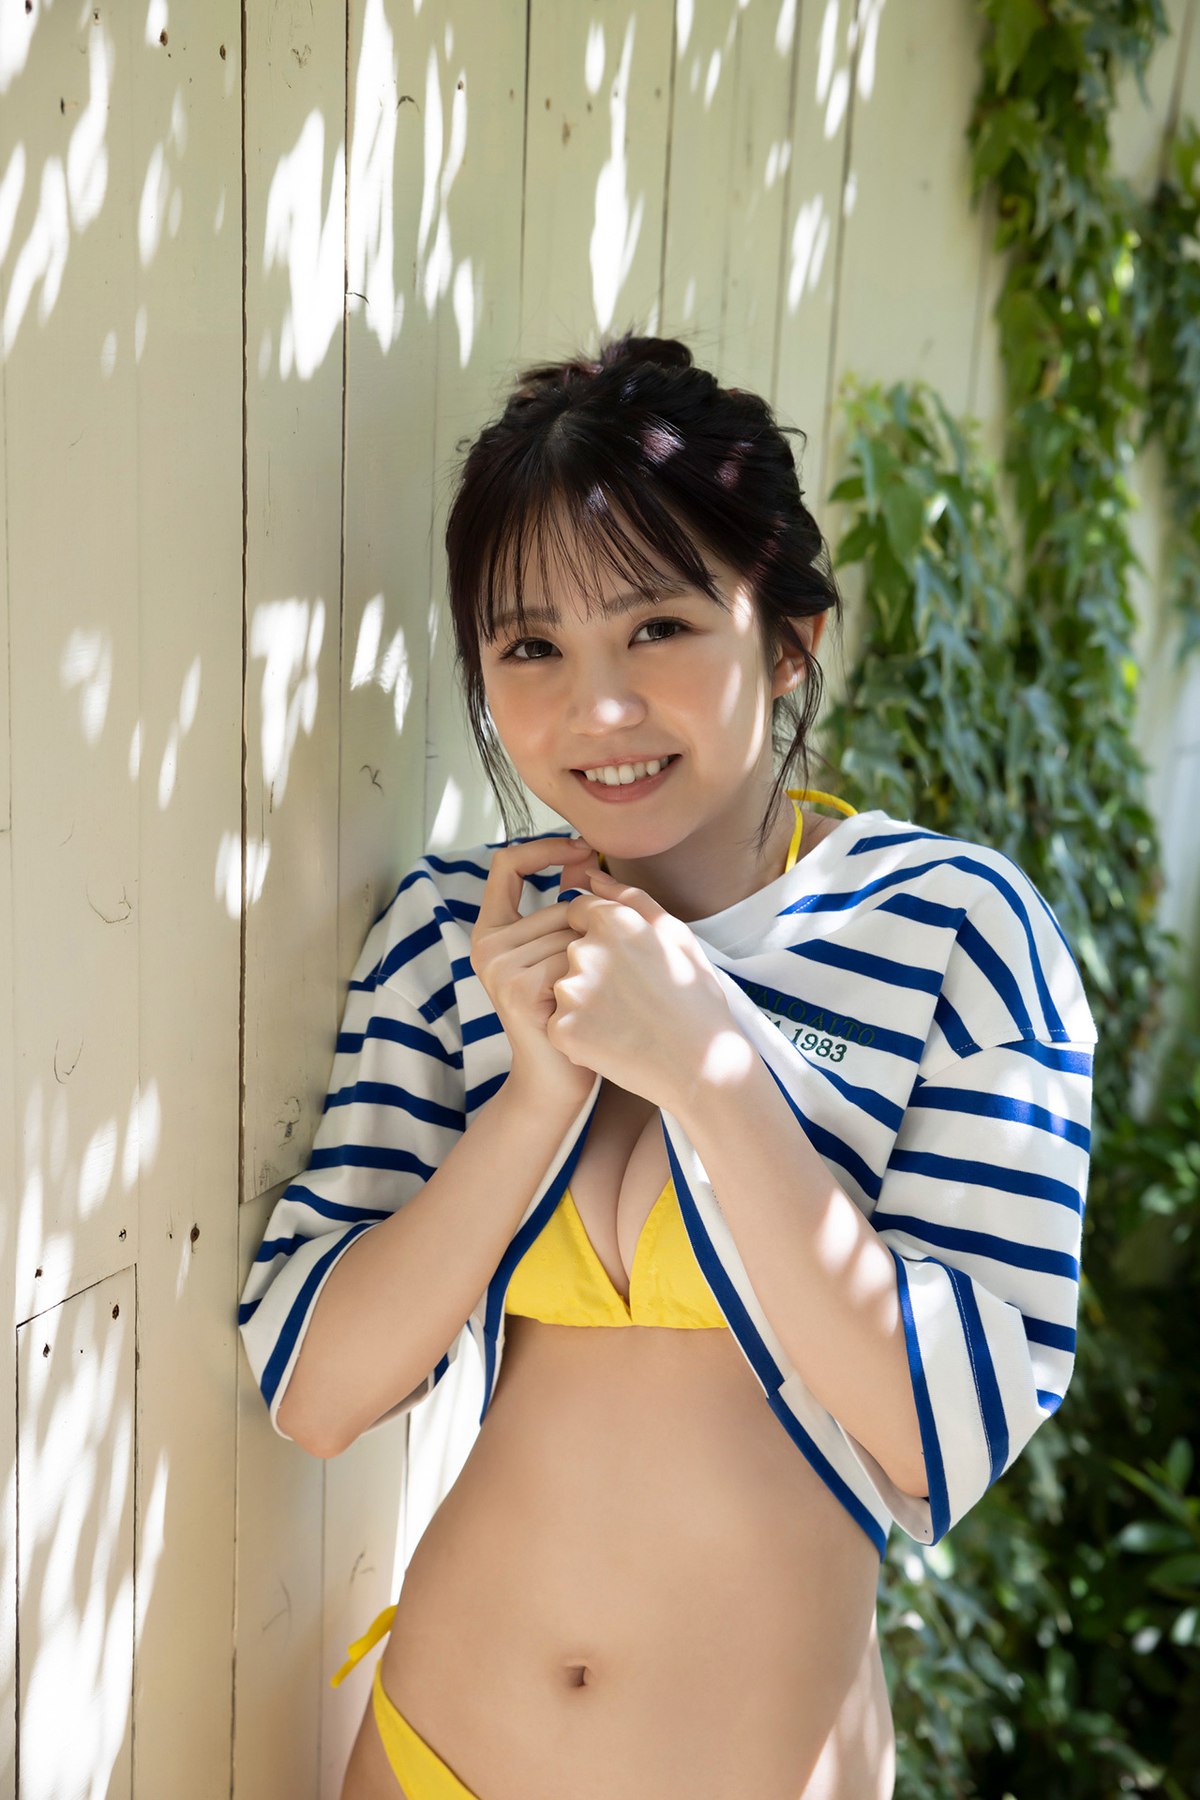 FLASH Photobook 2023 06 20 Tsumugi Hashimoto 橋本つむぎ The Best In Osaka Is The Best In Japan 0023 5197795217.jpg